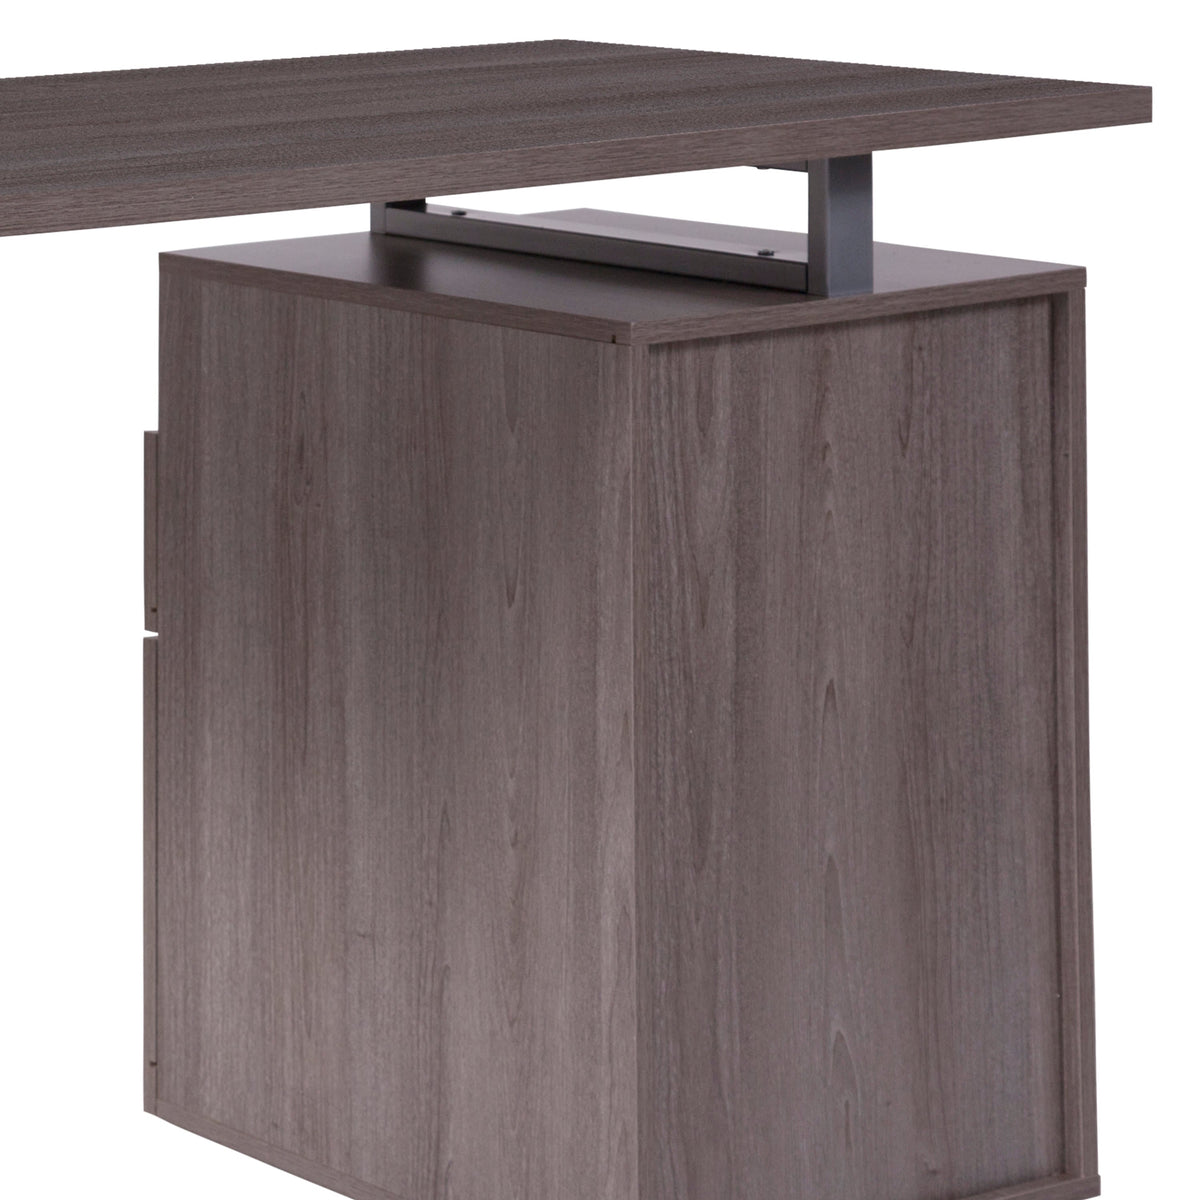 Light Ash |#| Lt Ash Wood Grain Finish Computer Desk with Two Drawers and Silver Metal Frame